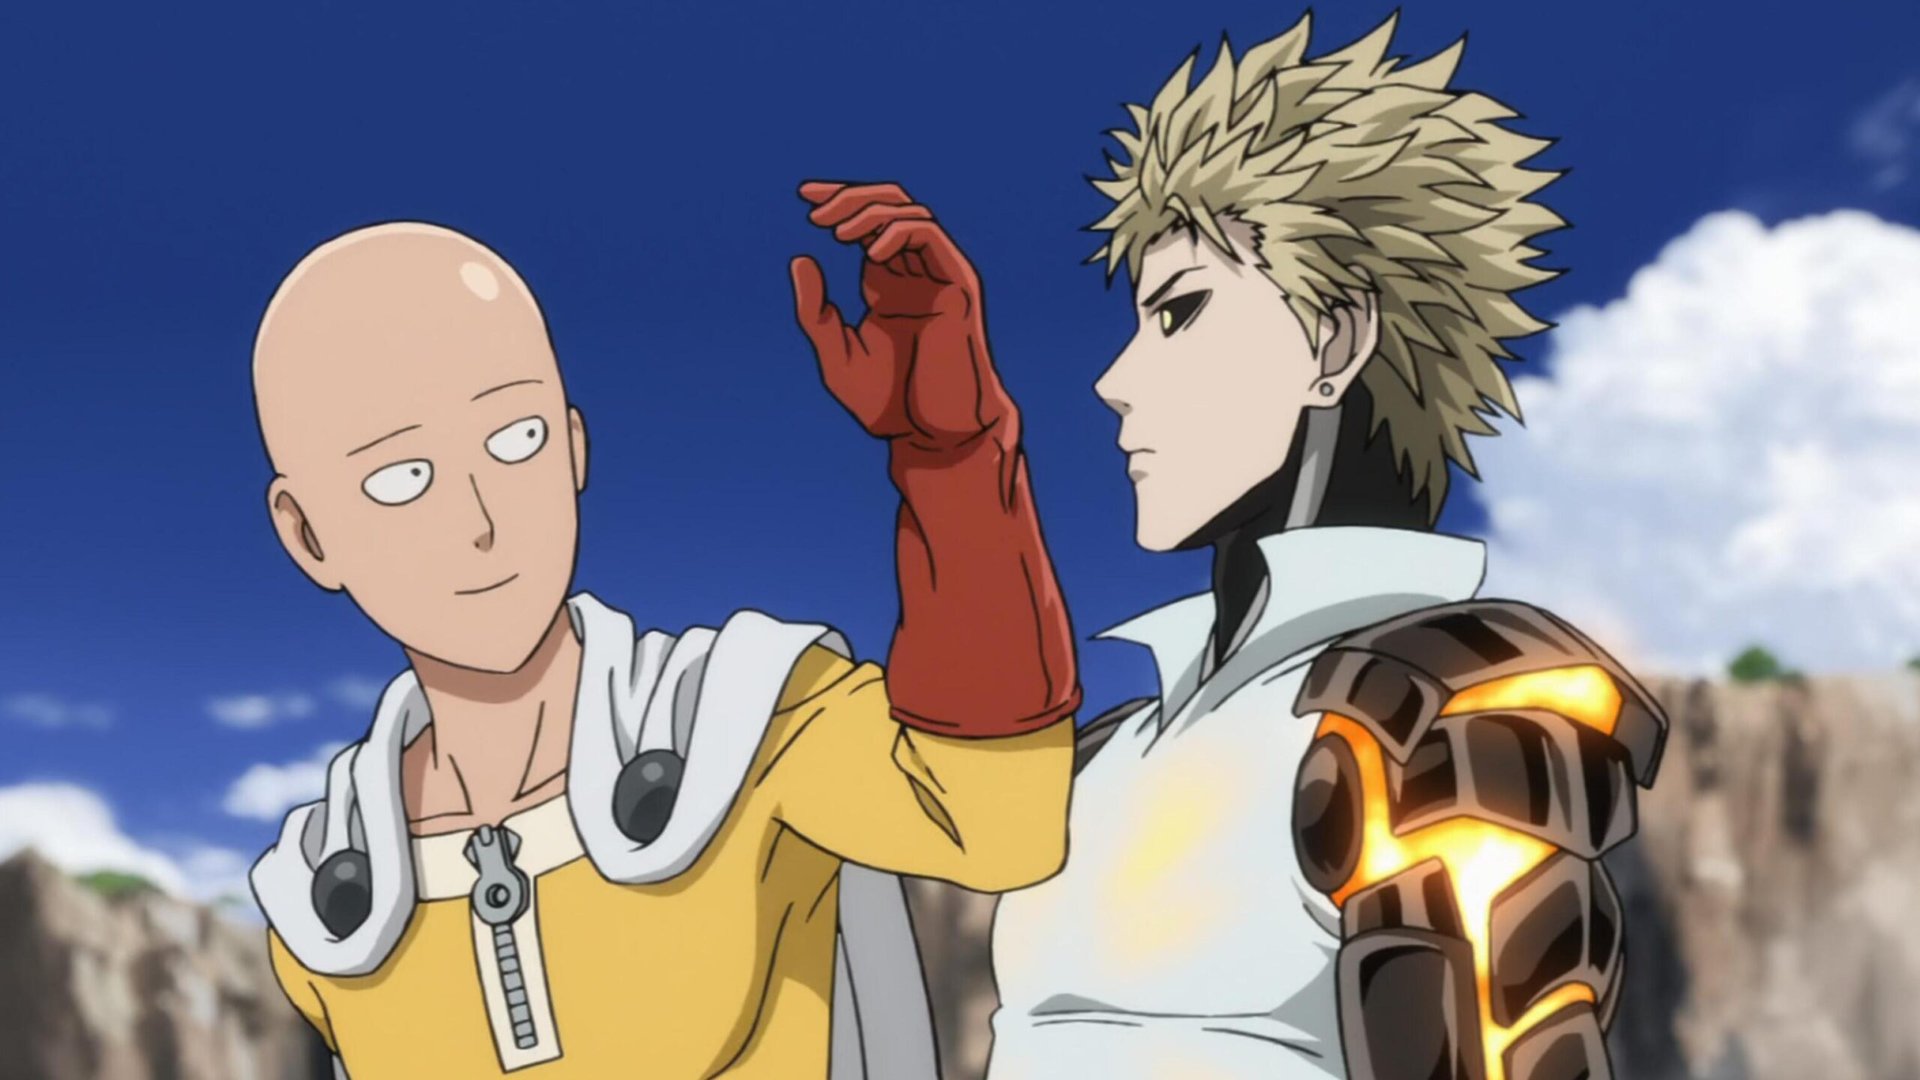 What is wrong with how metal objects look in One Punch Man Season